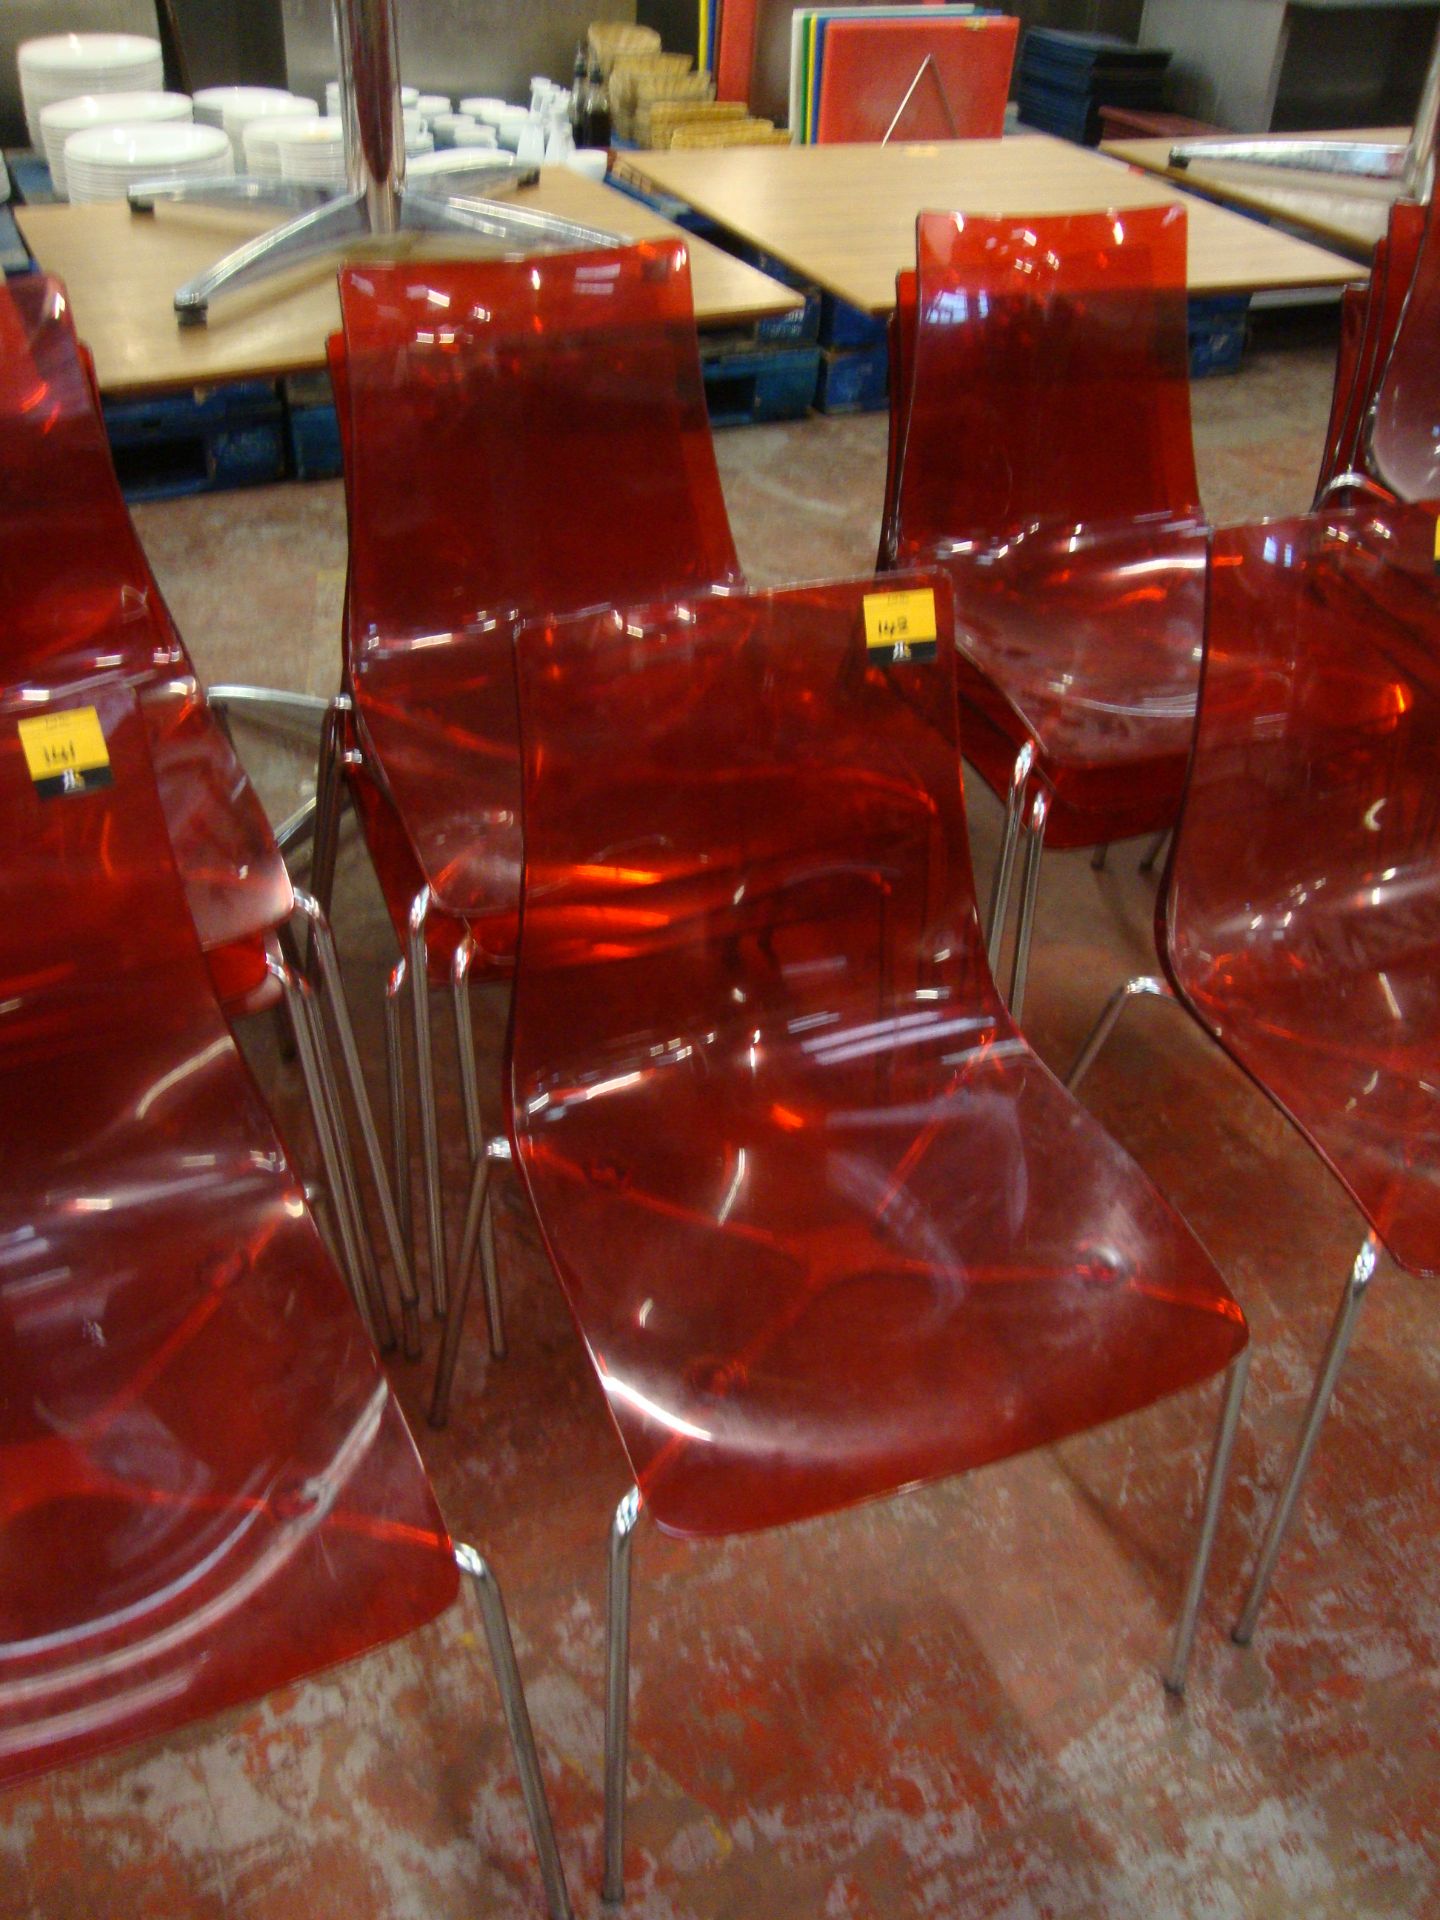 4 off matching red clear plastic chairs on metal legs. NB lots 138 - 145 consist of different